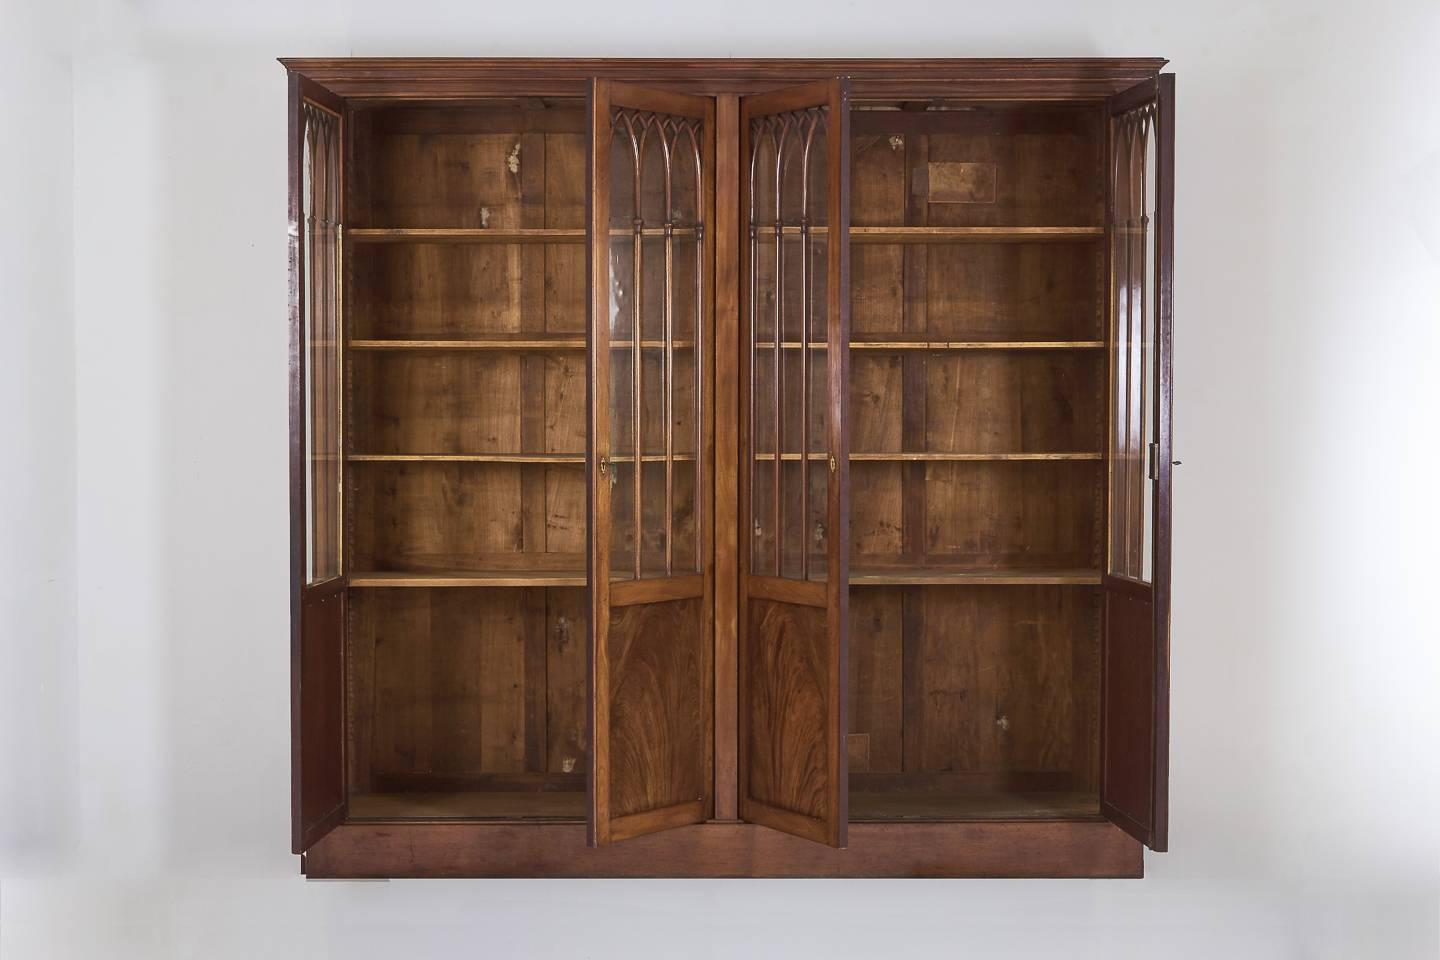 Magnificent, high quality, early 19th century bookcase with fantastic mahogany veneers. Veneered on a mahogany car case. With original glass, circa 1820.